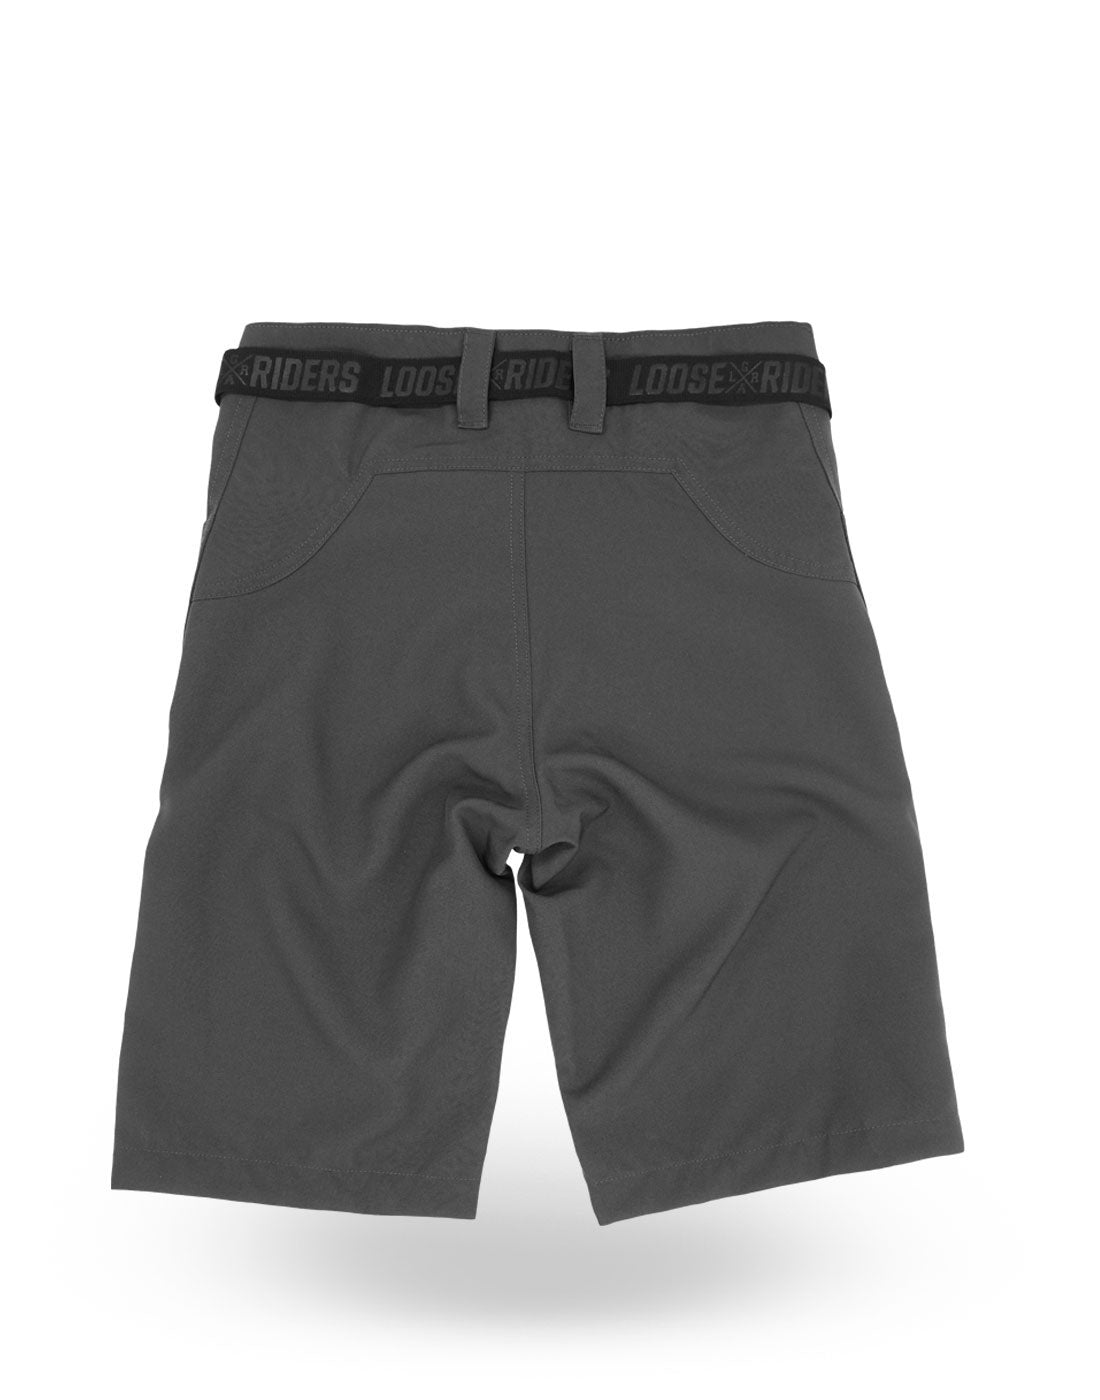 Shorts Sessions Grey Loose Riders